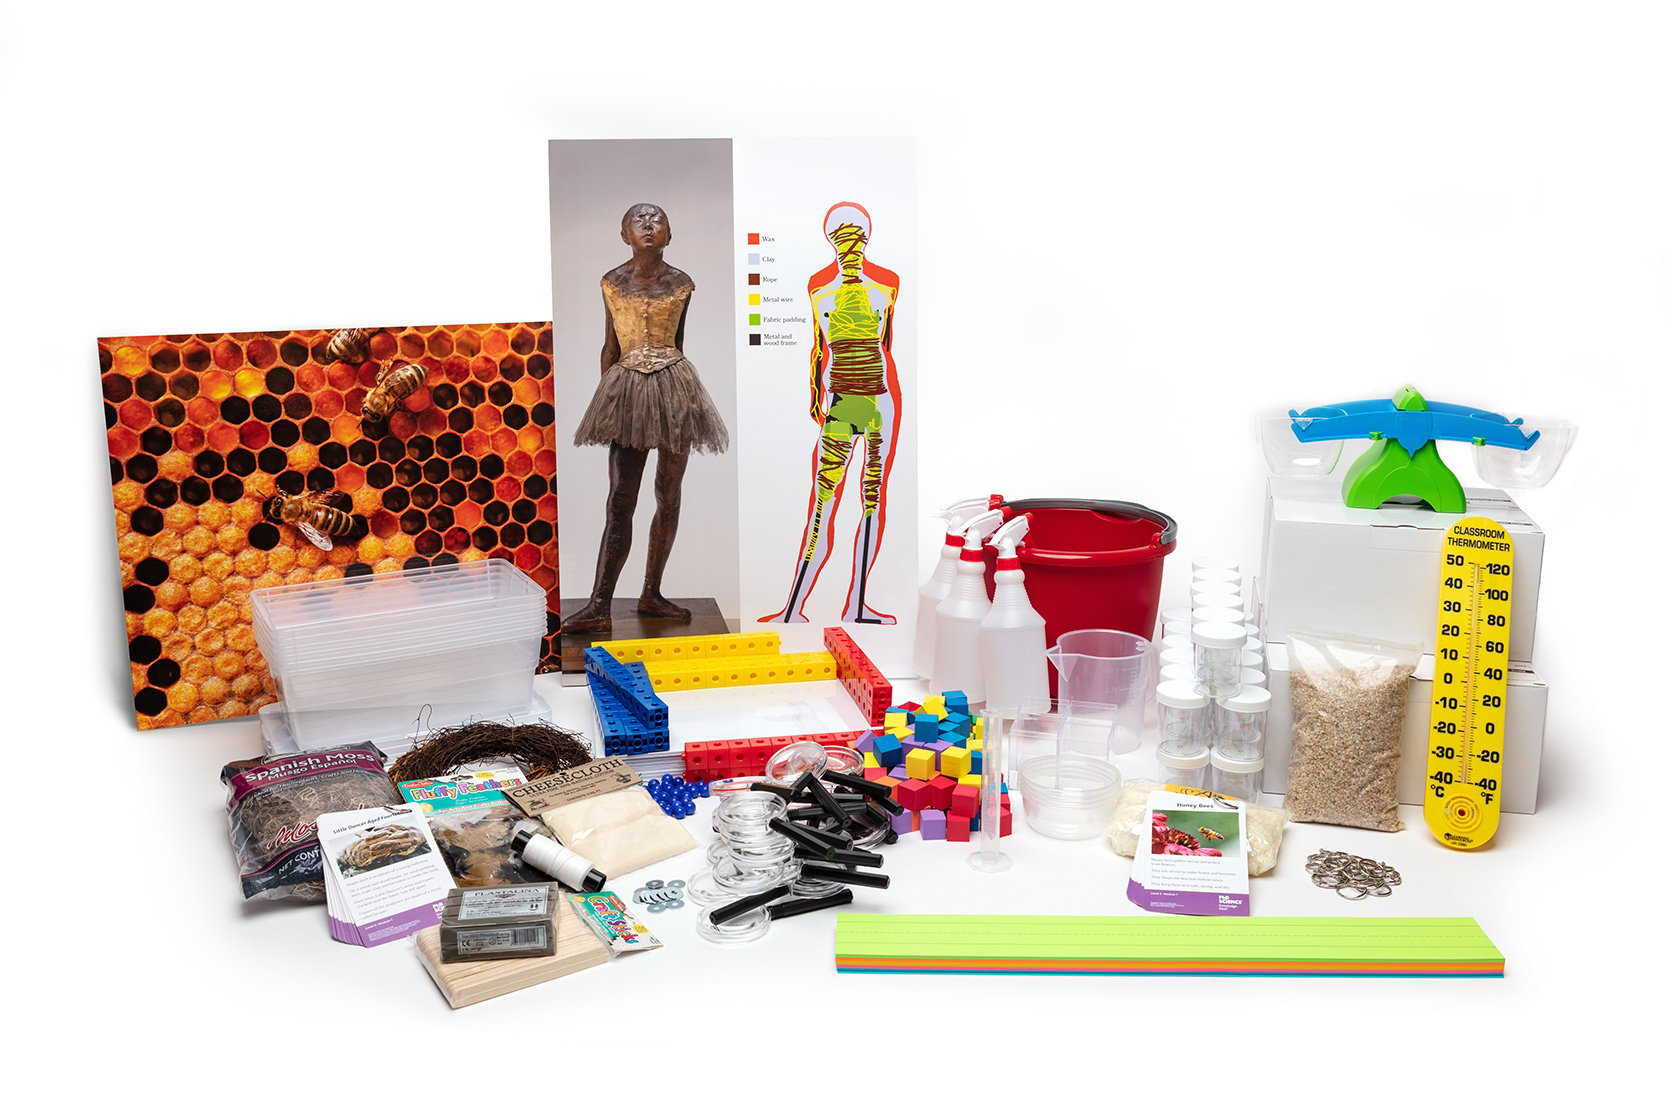 PhD Science hands-on materials kit from Level 2 Module 1 that includes plastic scales, Knowledge Deck cards and posters, and a thermometer